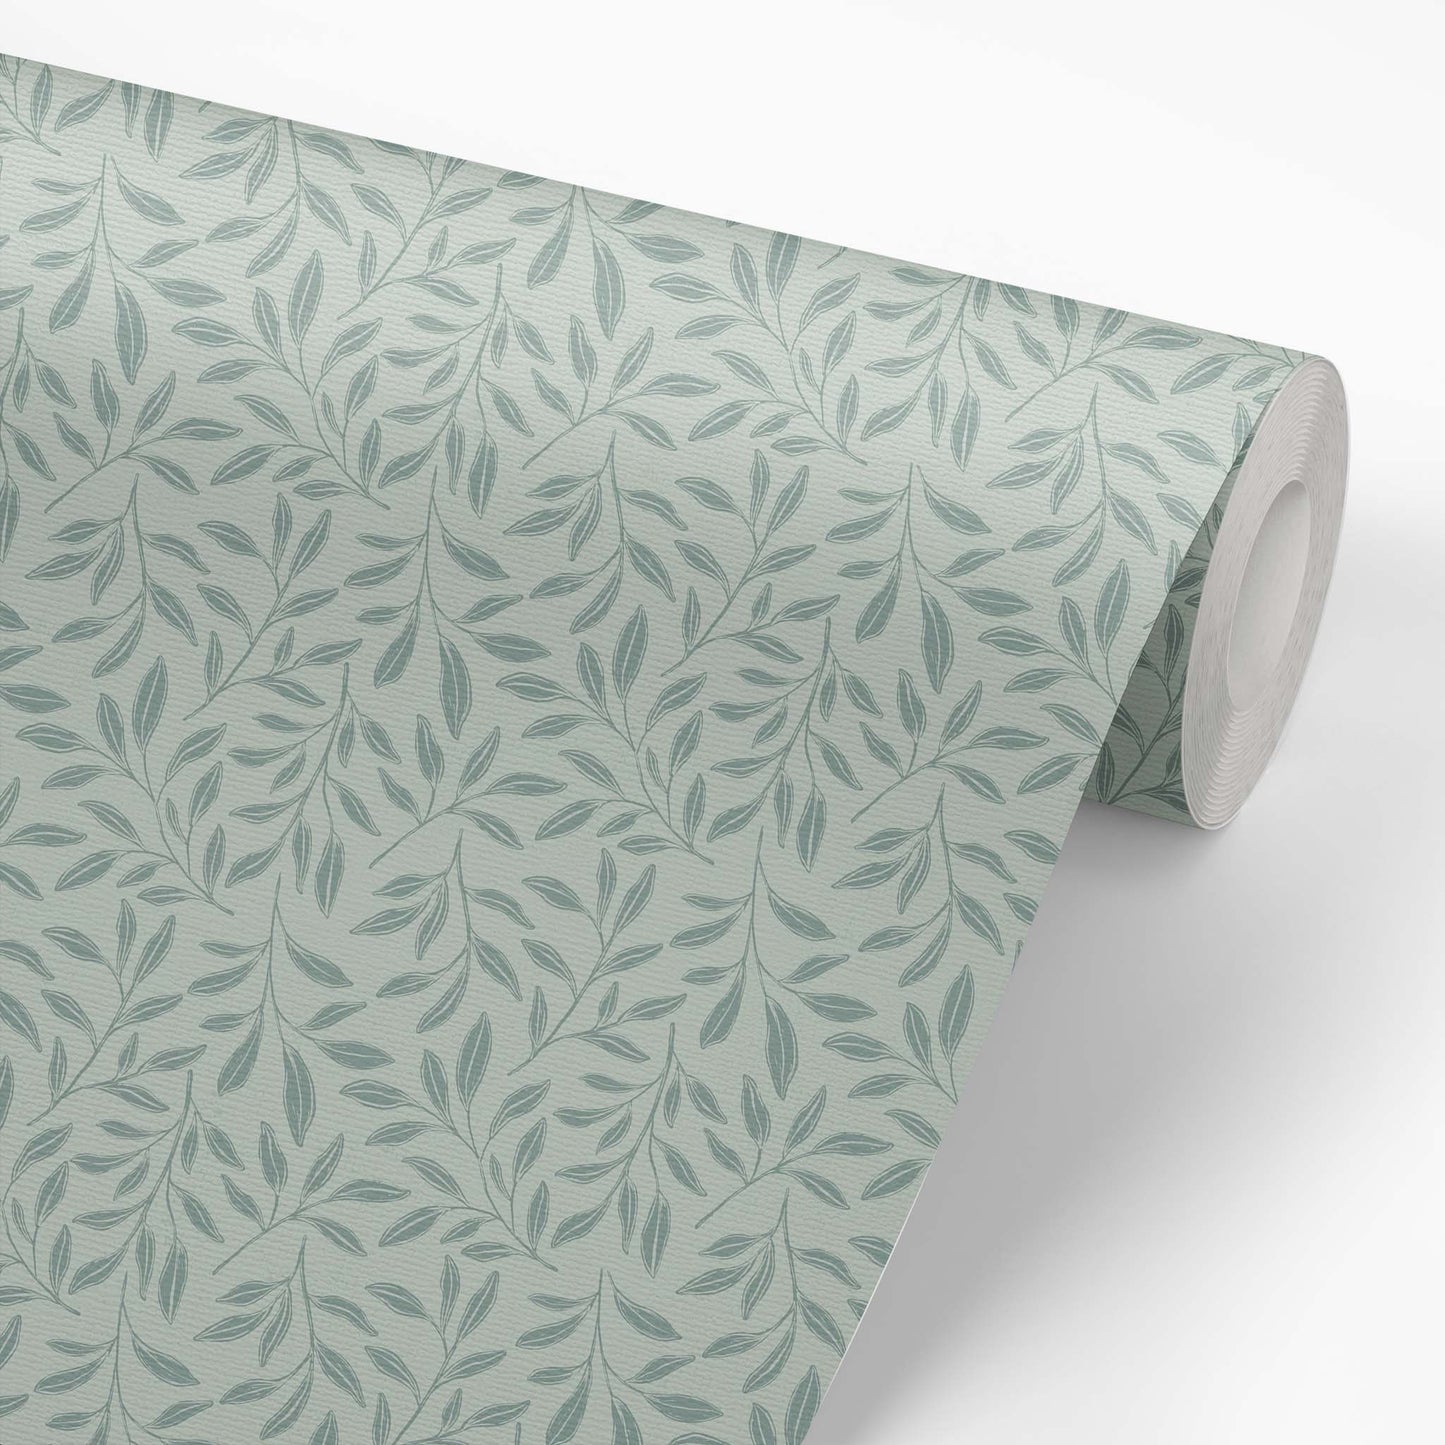 Wallpaper panel featuring Cayla Naylor Willow-Sage Peel and Stick Wallpaper - a classic pattern